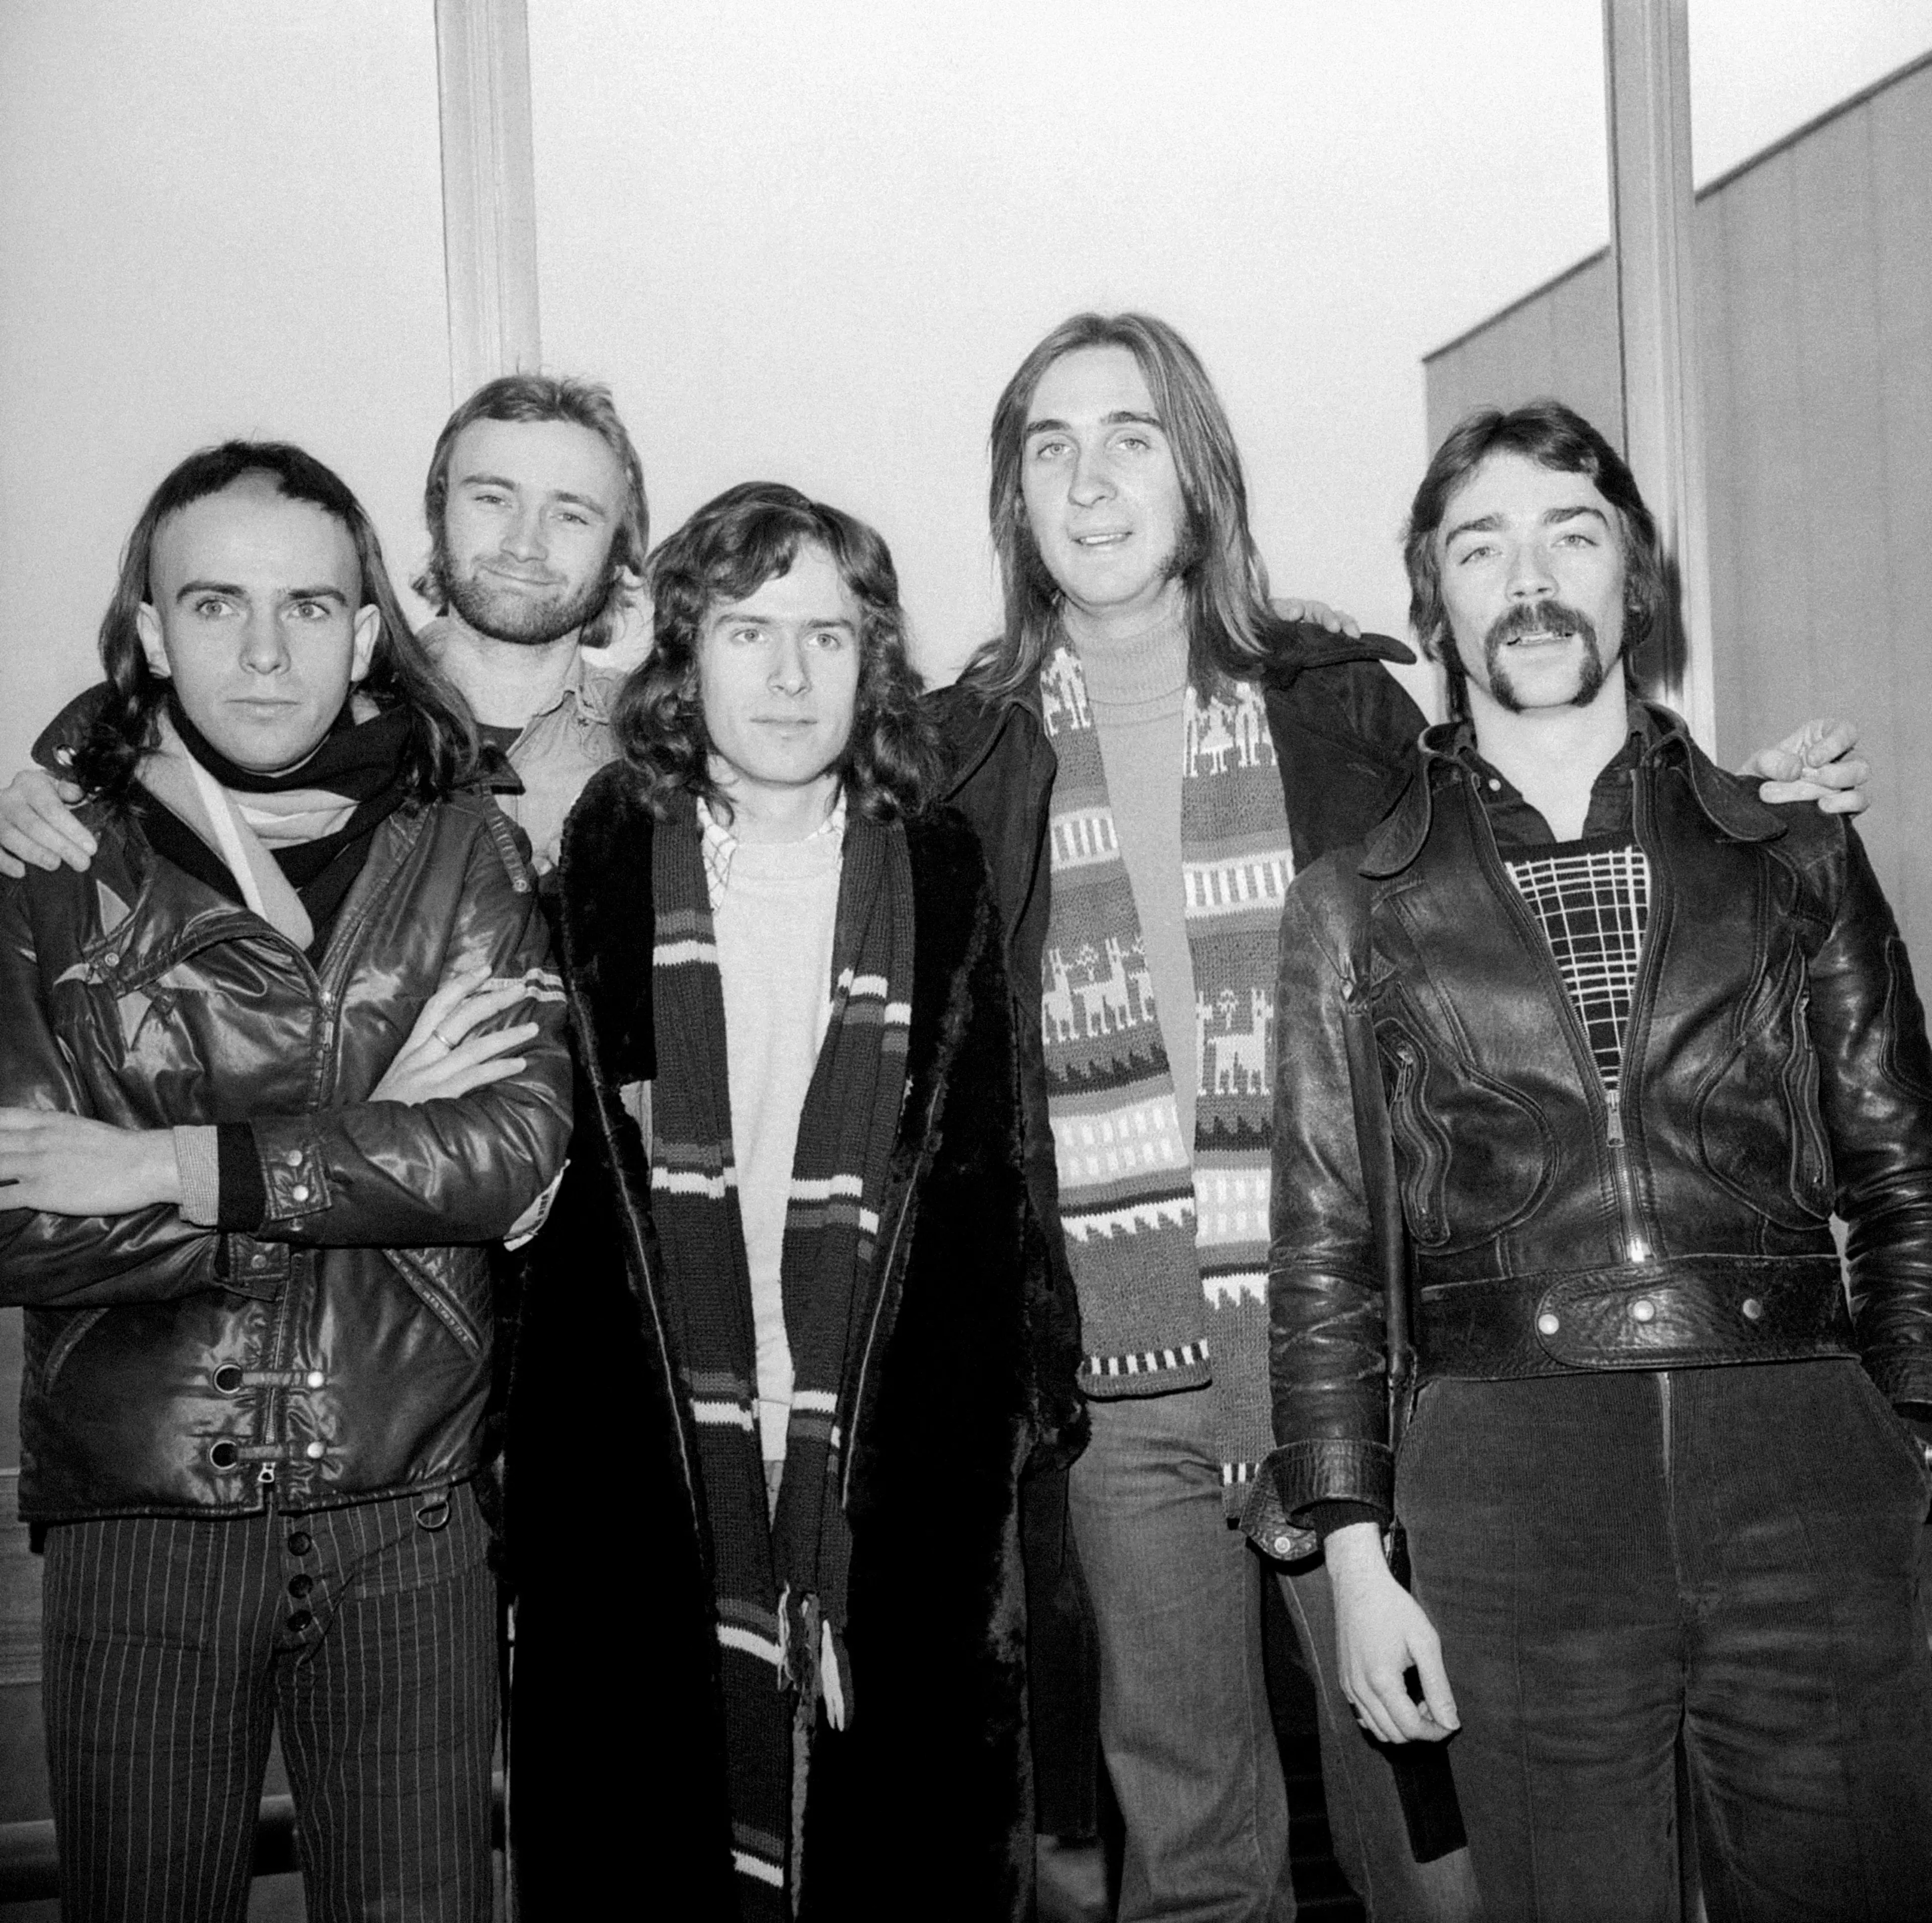 Genesis leaving for their US tour in 1974 (from the left:) lead singer Peter Gabriel, drummer Phil Collins, keyboards Tony Banks, bass Mike Rutherford and guitar Steve Hackett. (